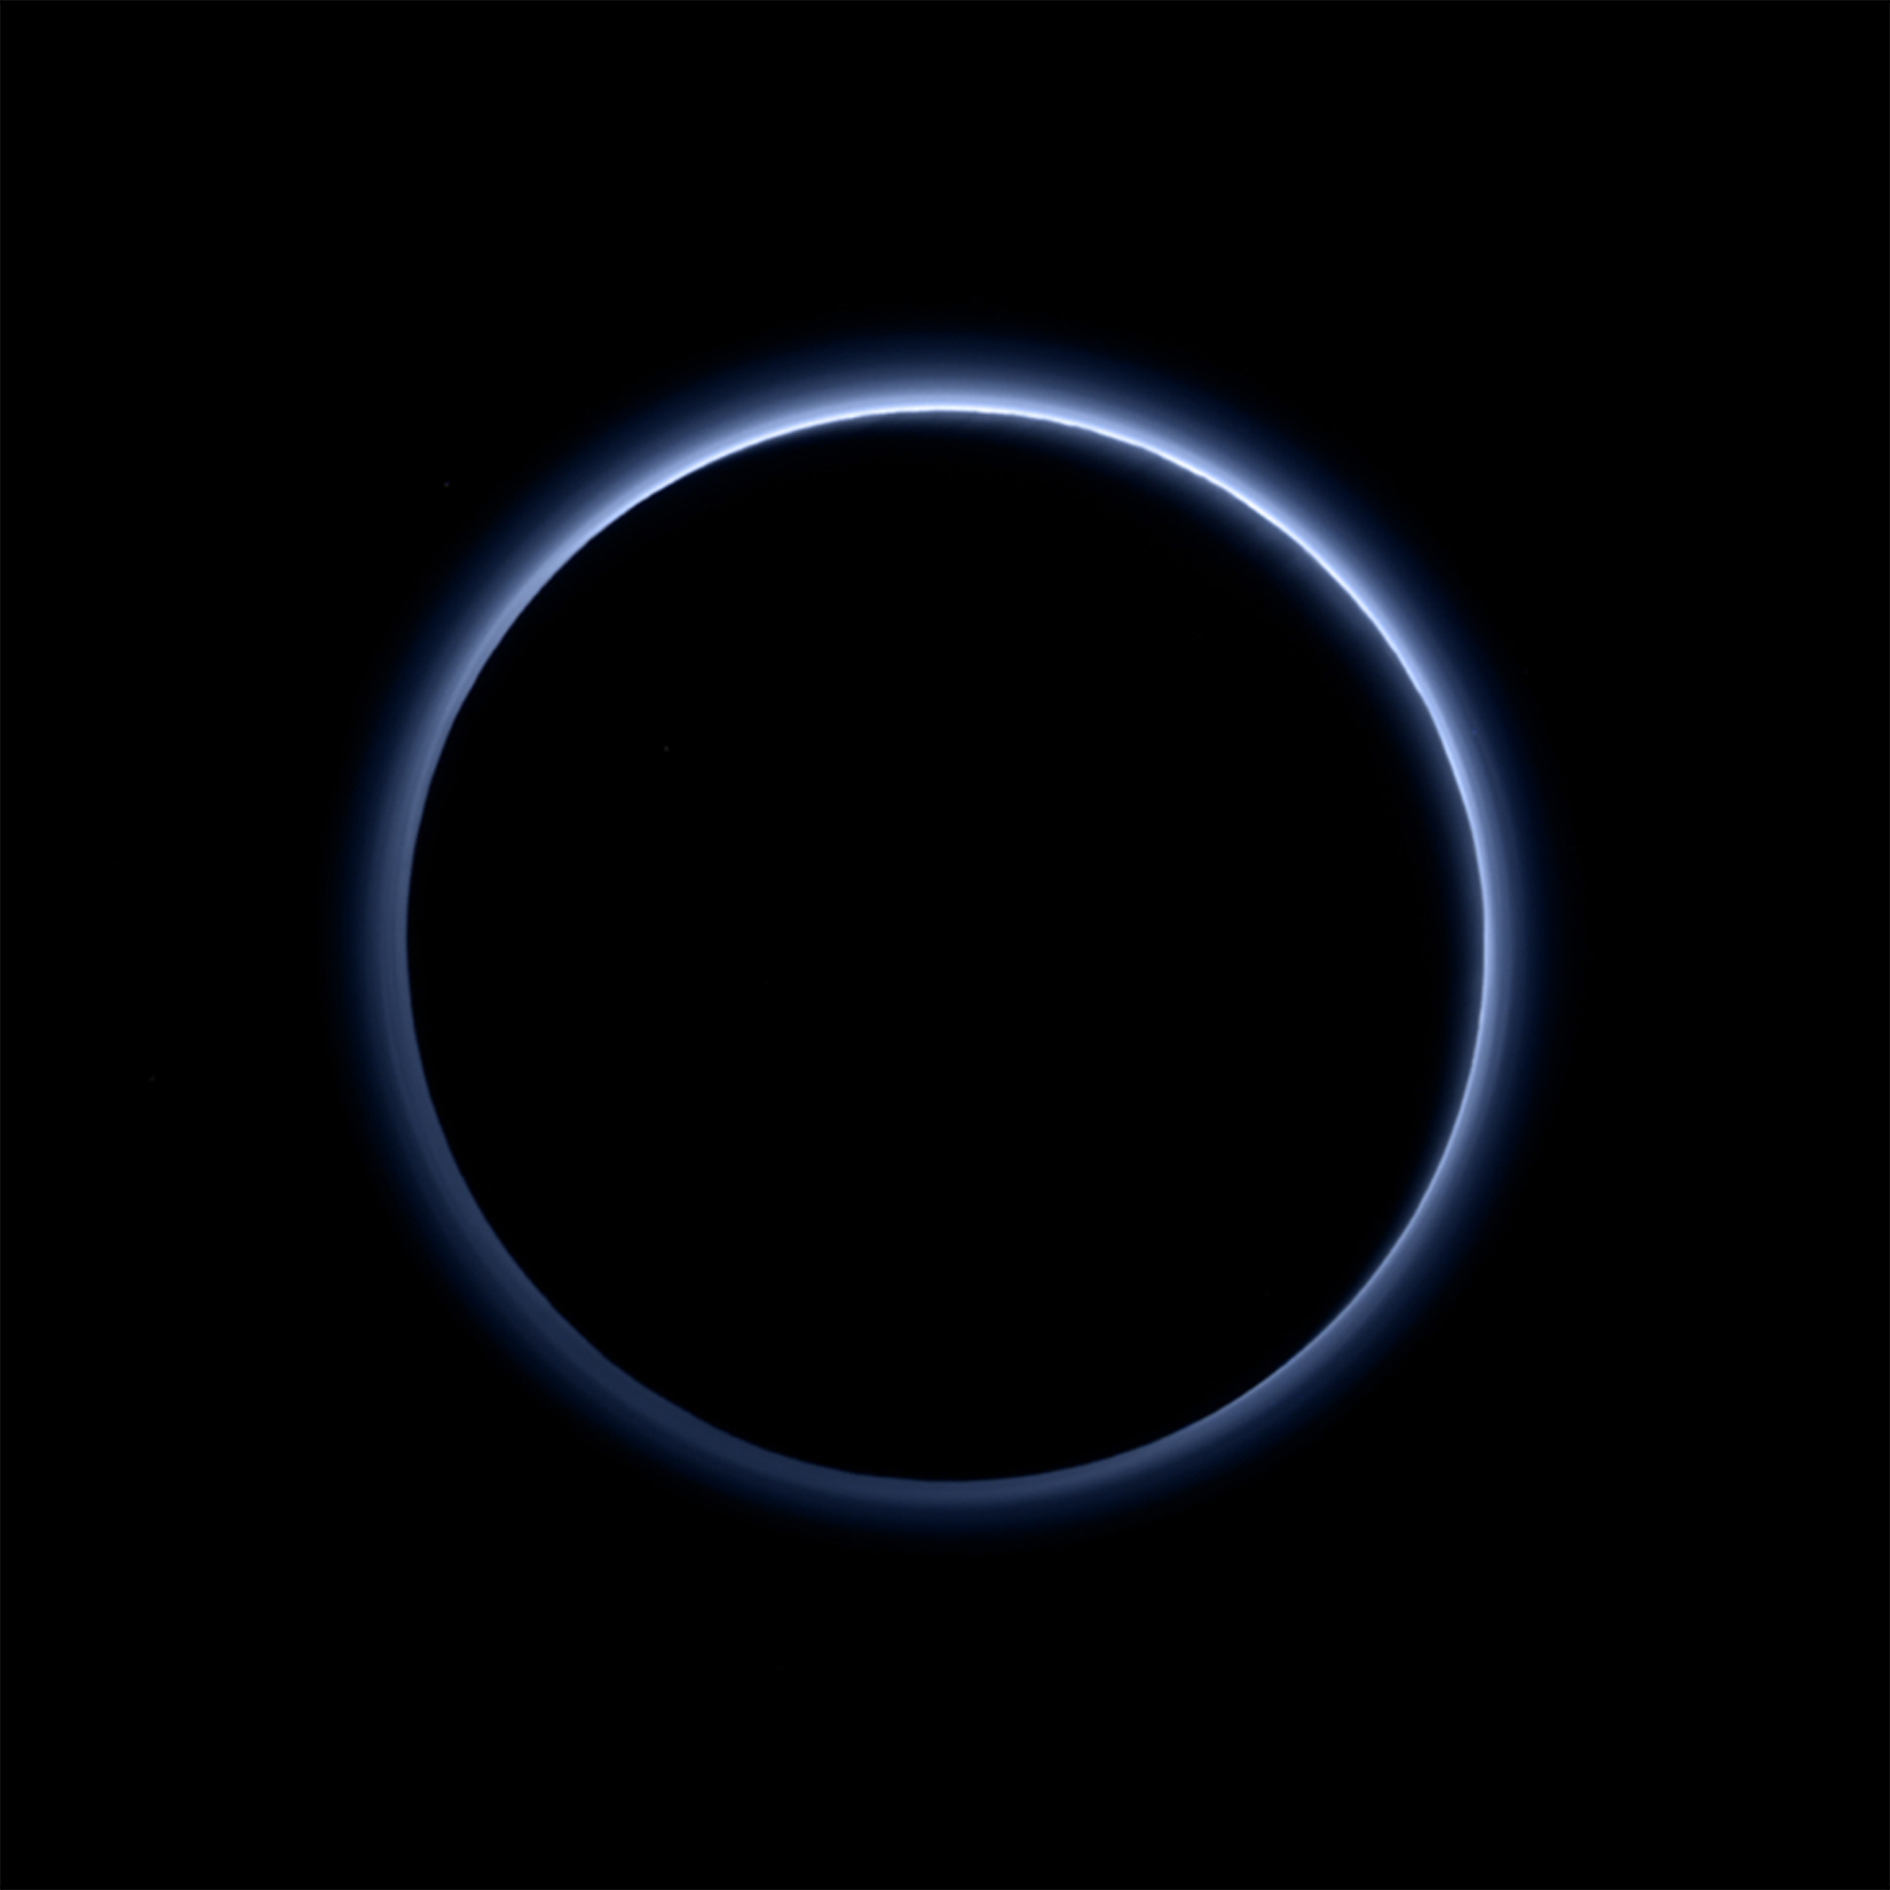 Figure 16: Pluto’s ‘blue skies’, imaged by New Horizons’ Ralph/ Multispectral Visible Imaging Camera (MVIC). This blue colour results from the scattering of sunlight by very small particles, in this case probably tholins, soot-like particles created by complex chemical reactions of nitrogen and methane initiated by ultraviolet light from the Sun. Credit: NASA/JHUAPL/SwRI